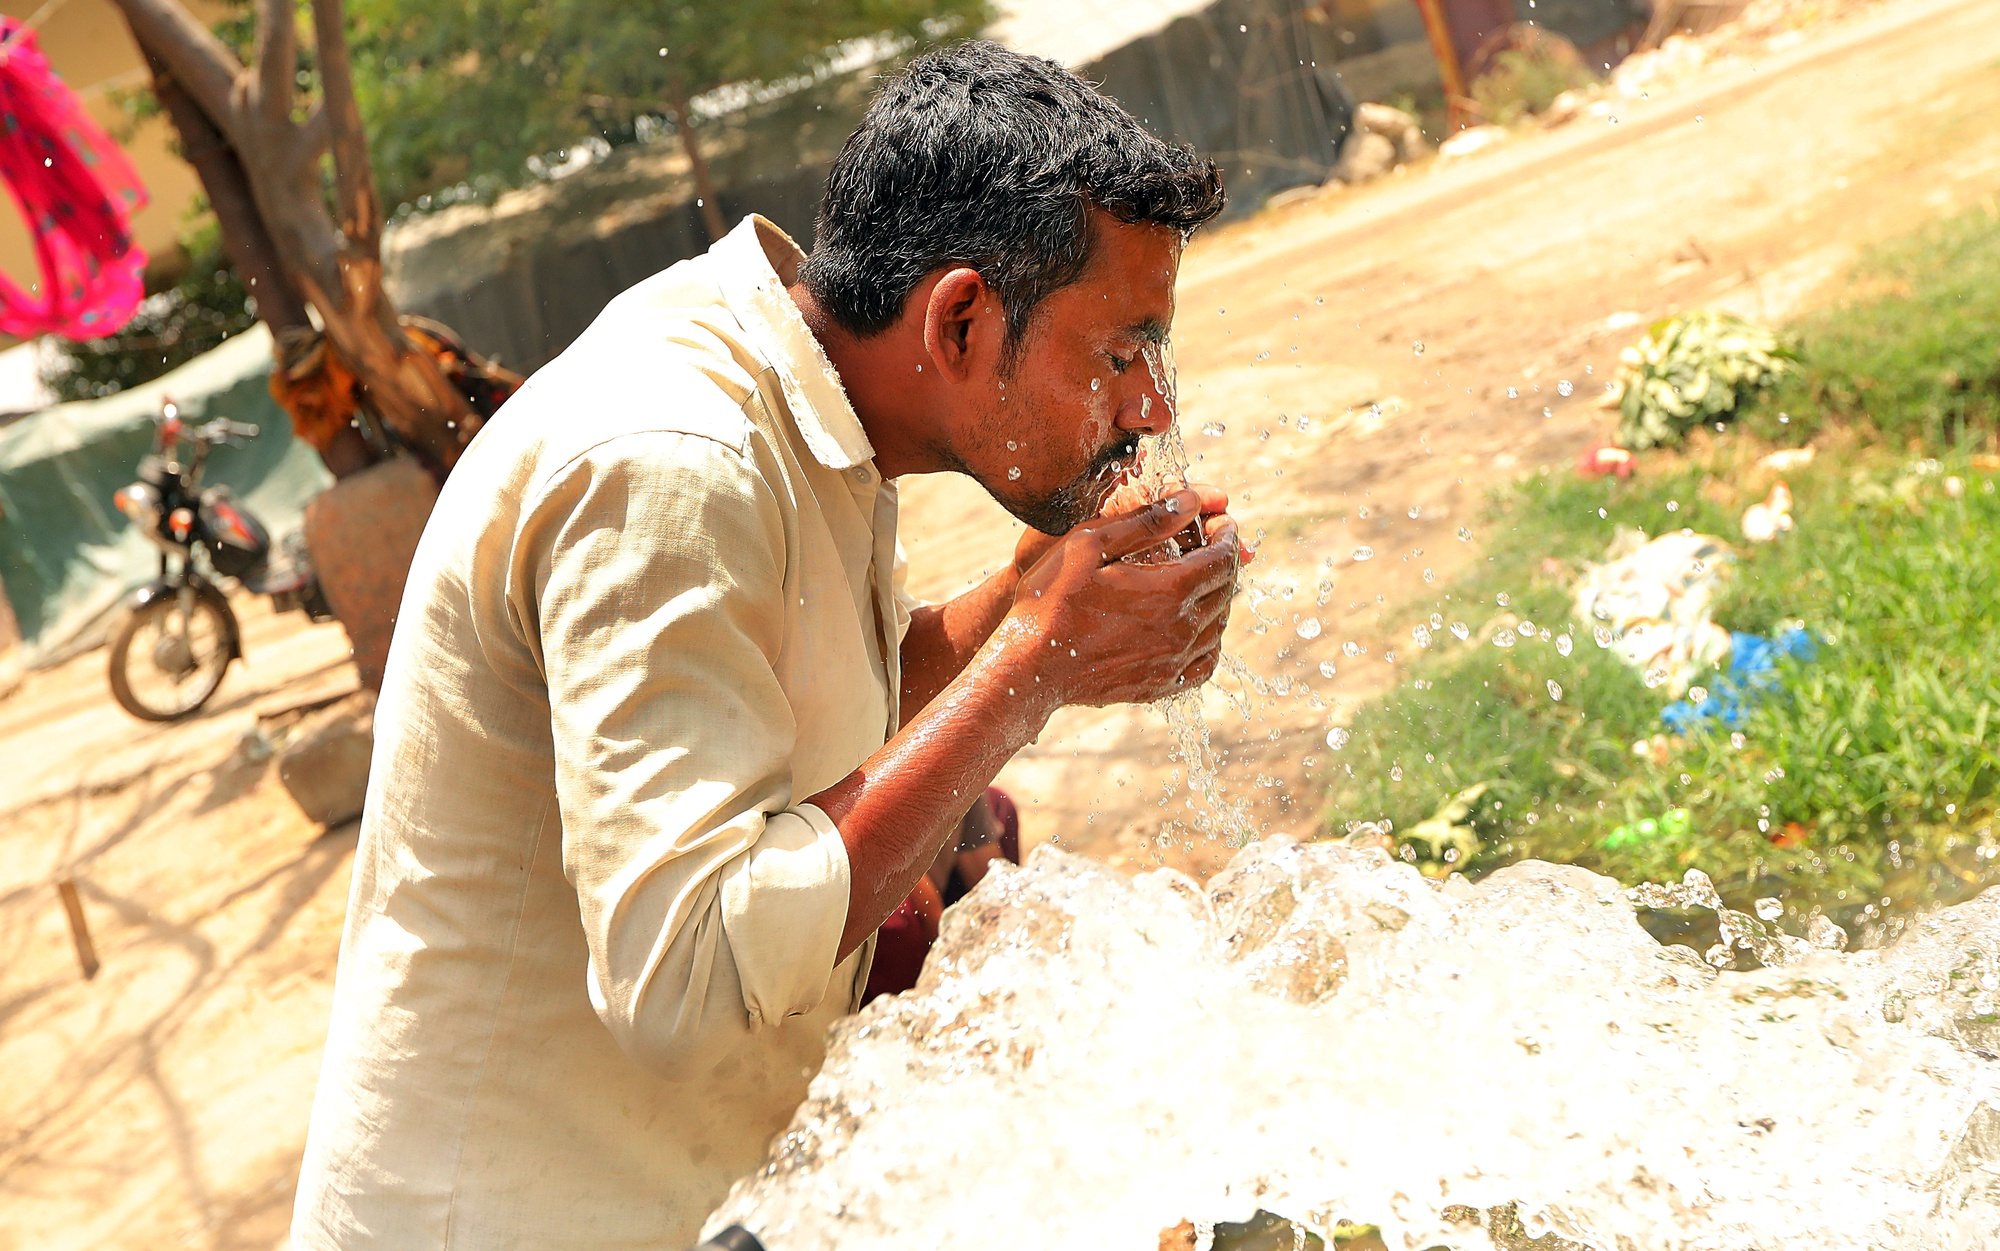 epa11381317 A man washes his face from  a tubewell on a hot day at the fields in New Delhi, India, 31 May 2024. The India Meteorological Department (IMD) has issued a heat red alert for Delhi, Rajasthan, Haryana, Punjab, and Madhya Pradesh. The IMD Director General M Mohapatra said they are checking the temperature sensor in Delhi&#039;s Mungeshpur automatic weather station to see if it is working properly, as there were temperatures of over 50 degrees Celsius recorded on 29 May, and the weather department has reported that the maximum temperature is anticipated to reach around 44 degrees Celsius, in the Indian capital.  EPA/HARISH TYAGI